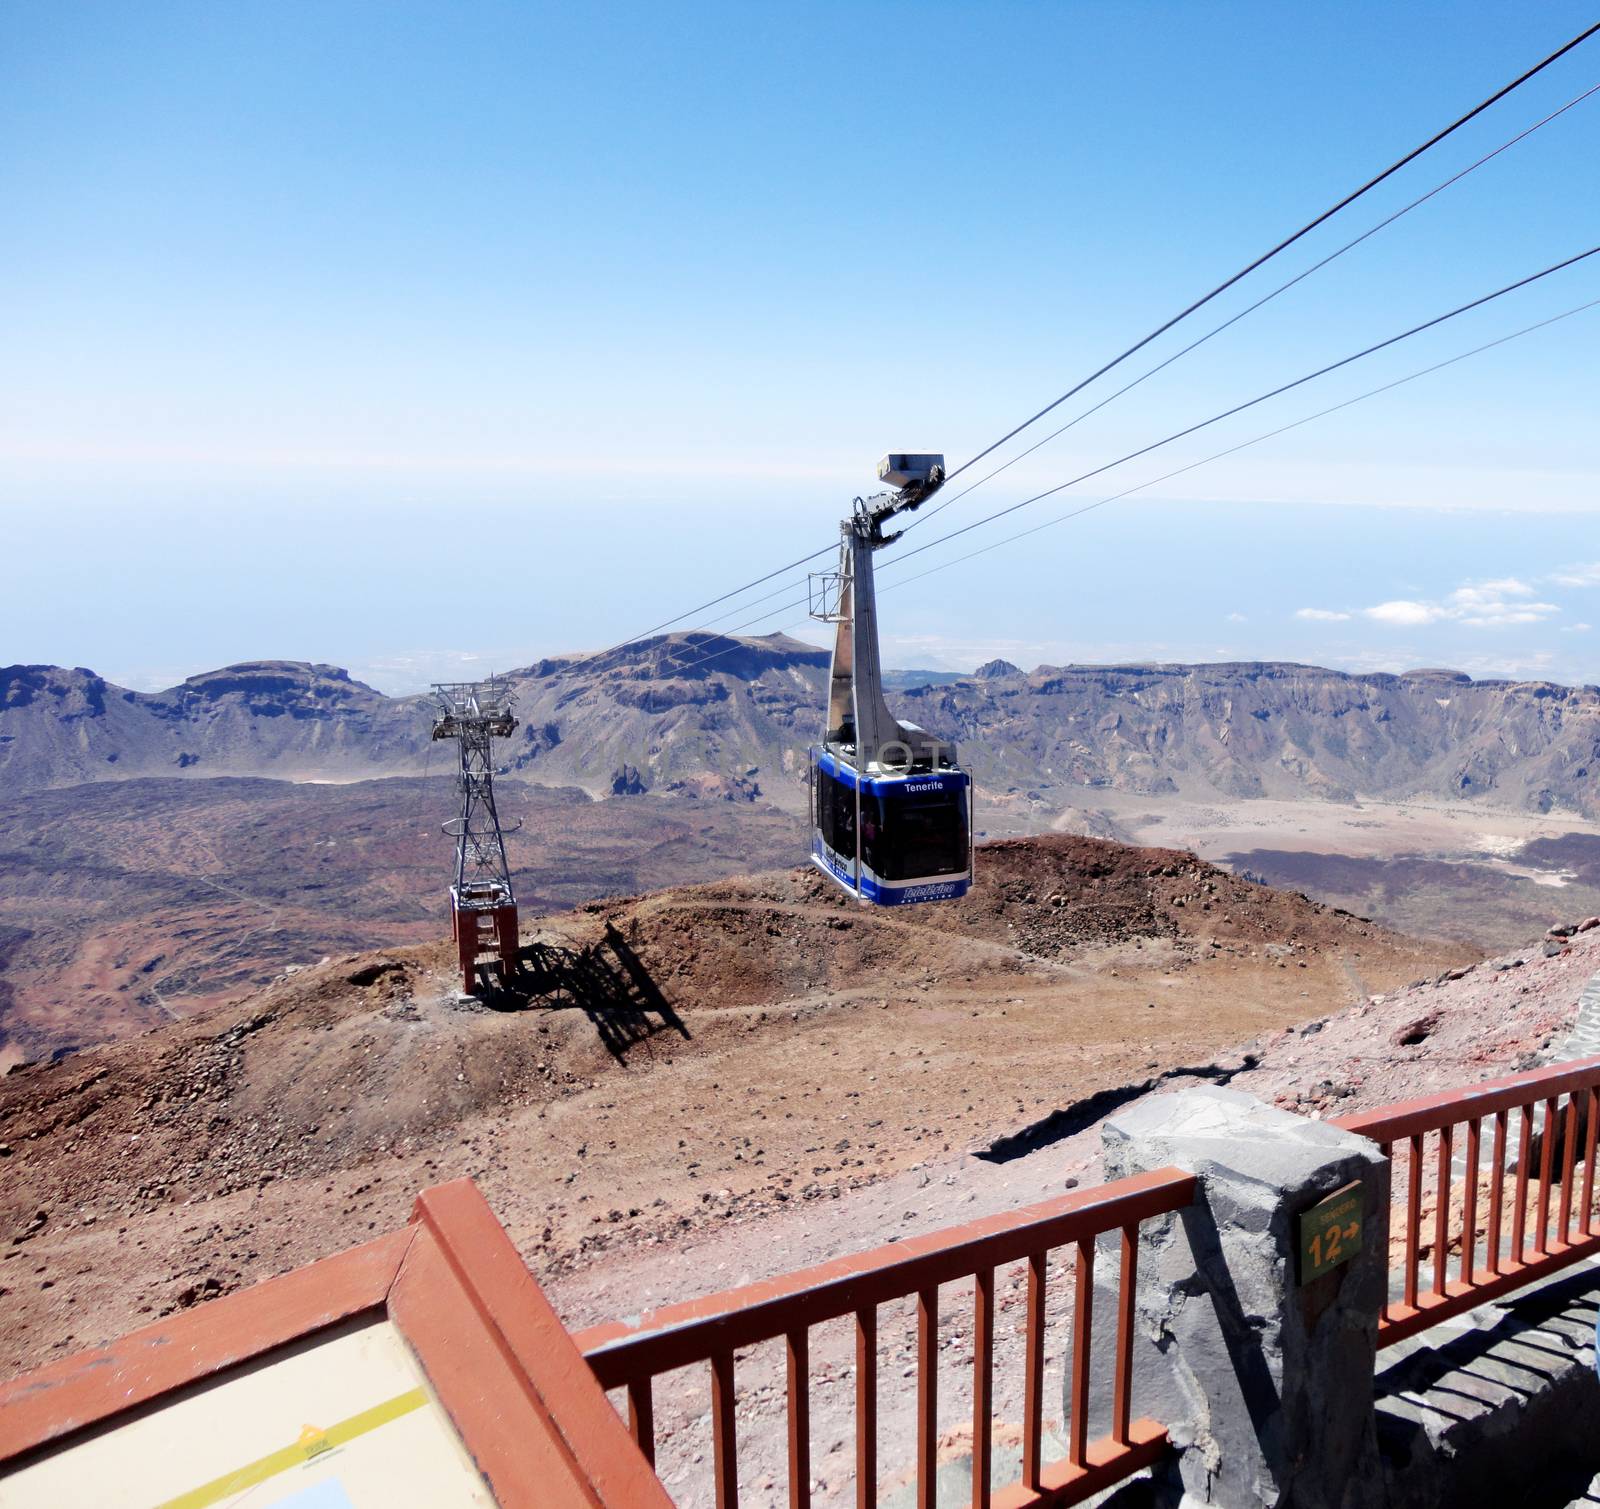 Panoramic view of the teleferic in Teide mountain, Tenerife, Canary Islands, Spain.

Picture taken on July 27, 2011.